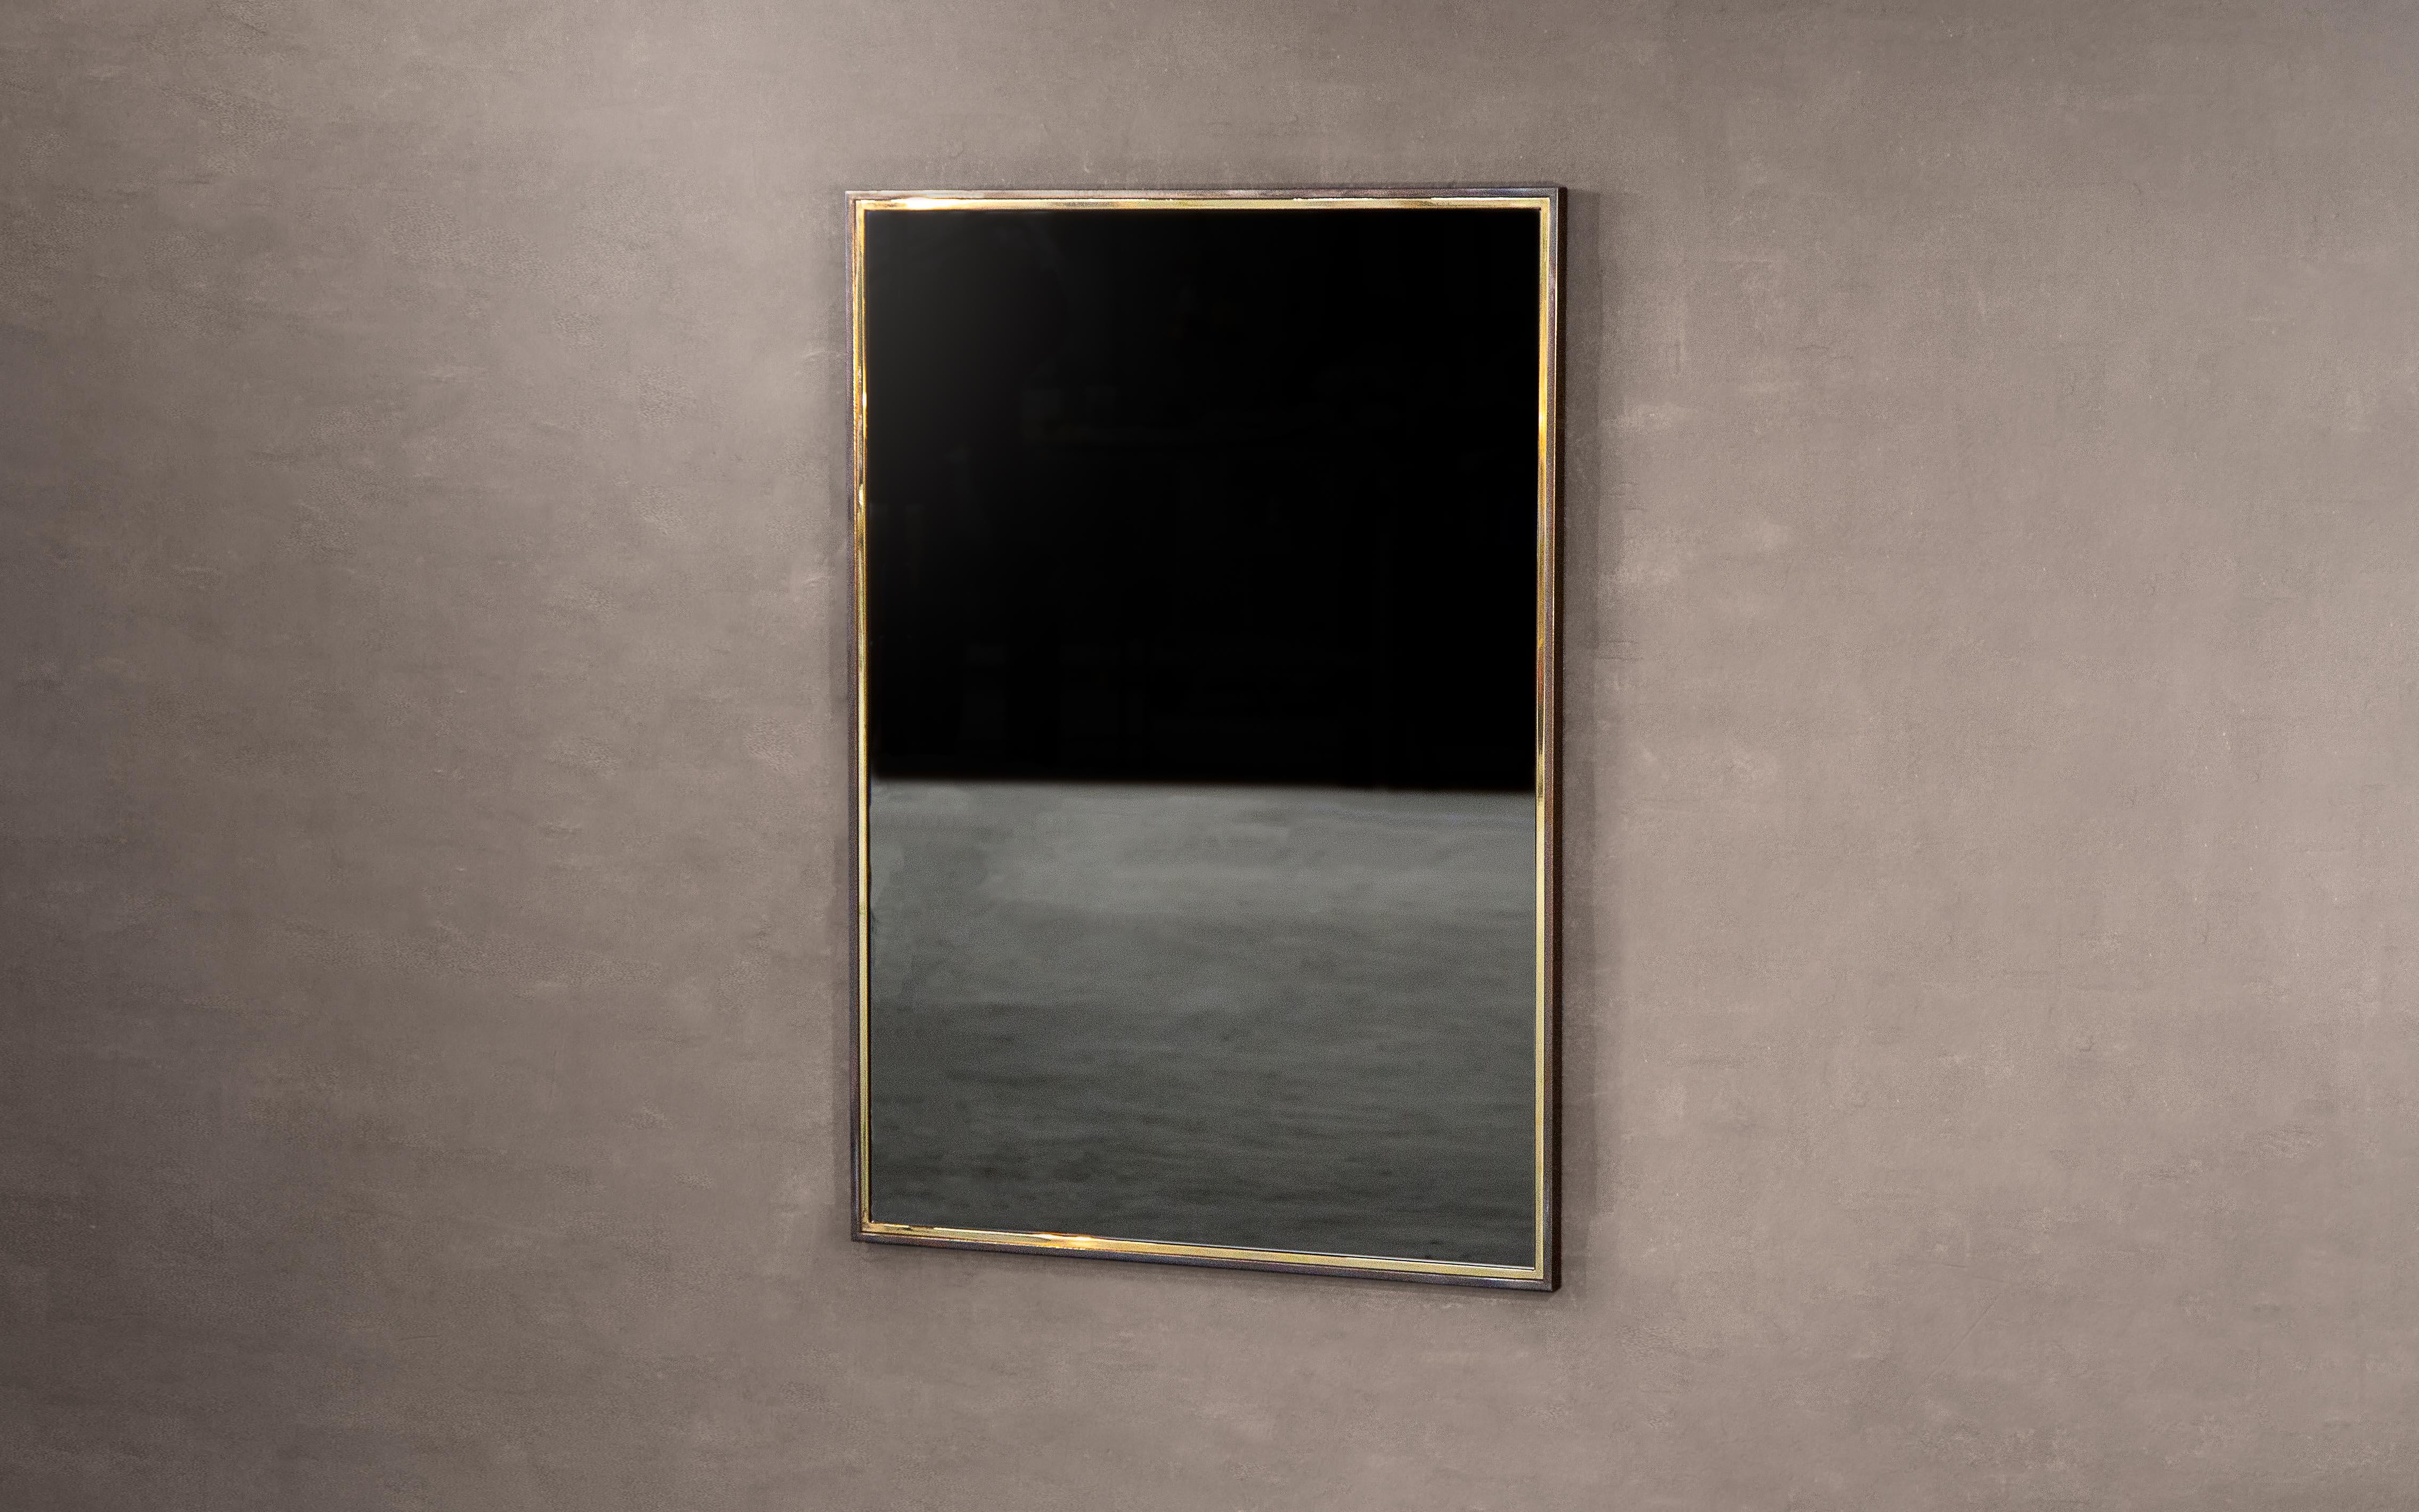 A dual-framed wall mirror in polished brass and blackened steel. Bronze or grey tinted glass available. Supplied with two screw fixing points to rear face. Handcrafted in the North East, England.

Measures: 76cm height x 55cm width x 2.5cm